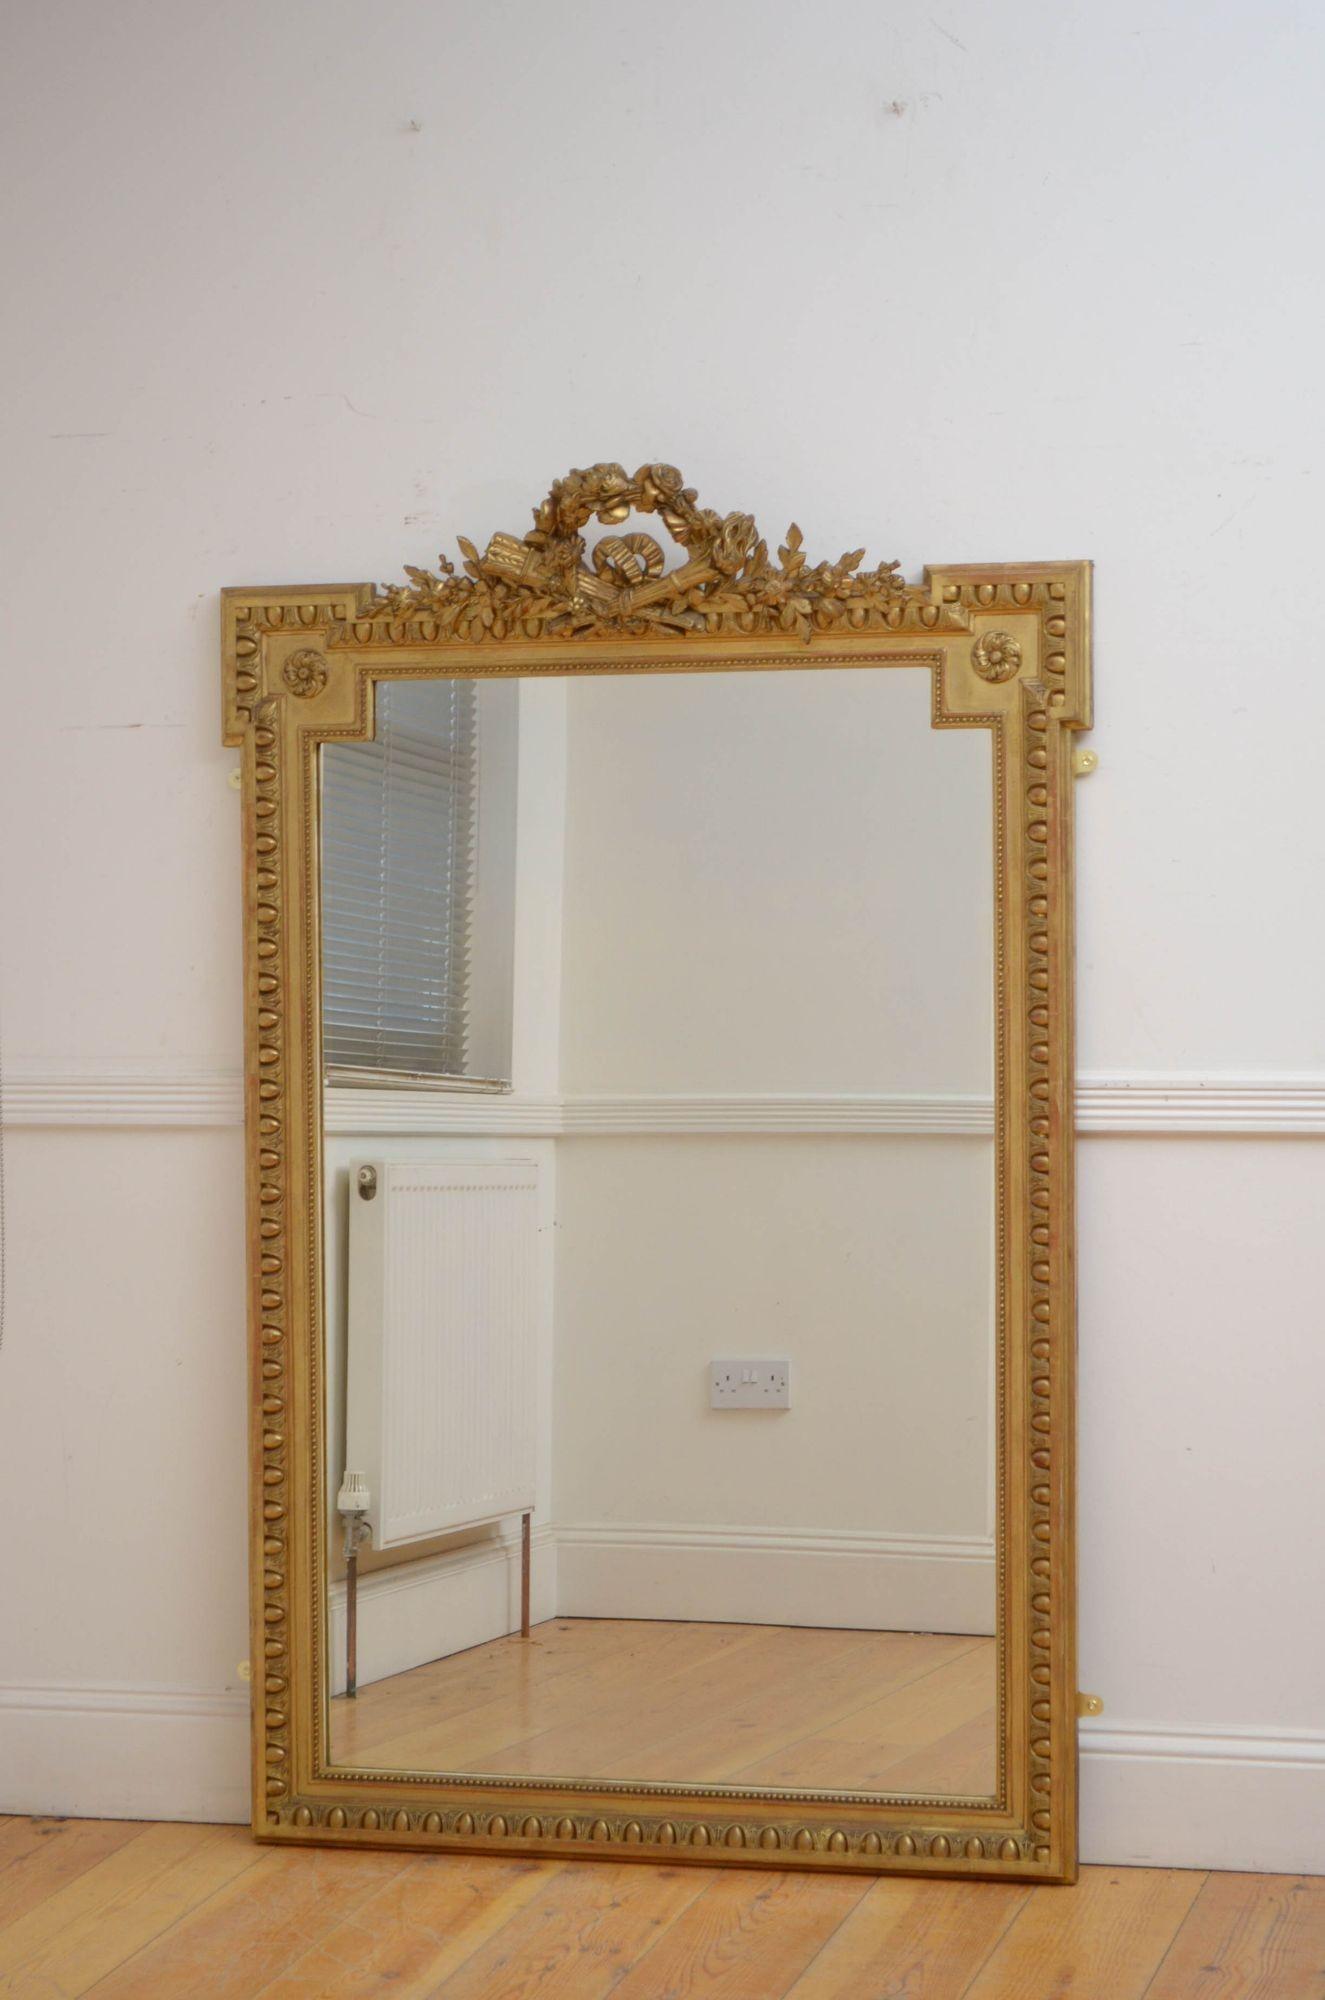 Sn5474 Fine 19th century French gilded wall mirror, having original glass with some imperfections in moulded, beaded and egg and dart carved giltwood frame with foliage centre crest decorated with a flowery bow. This antique mirror retains its